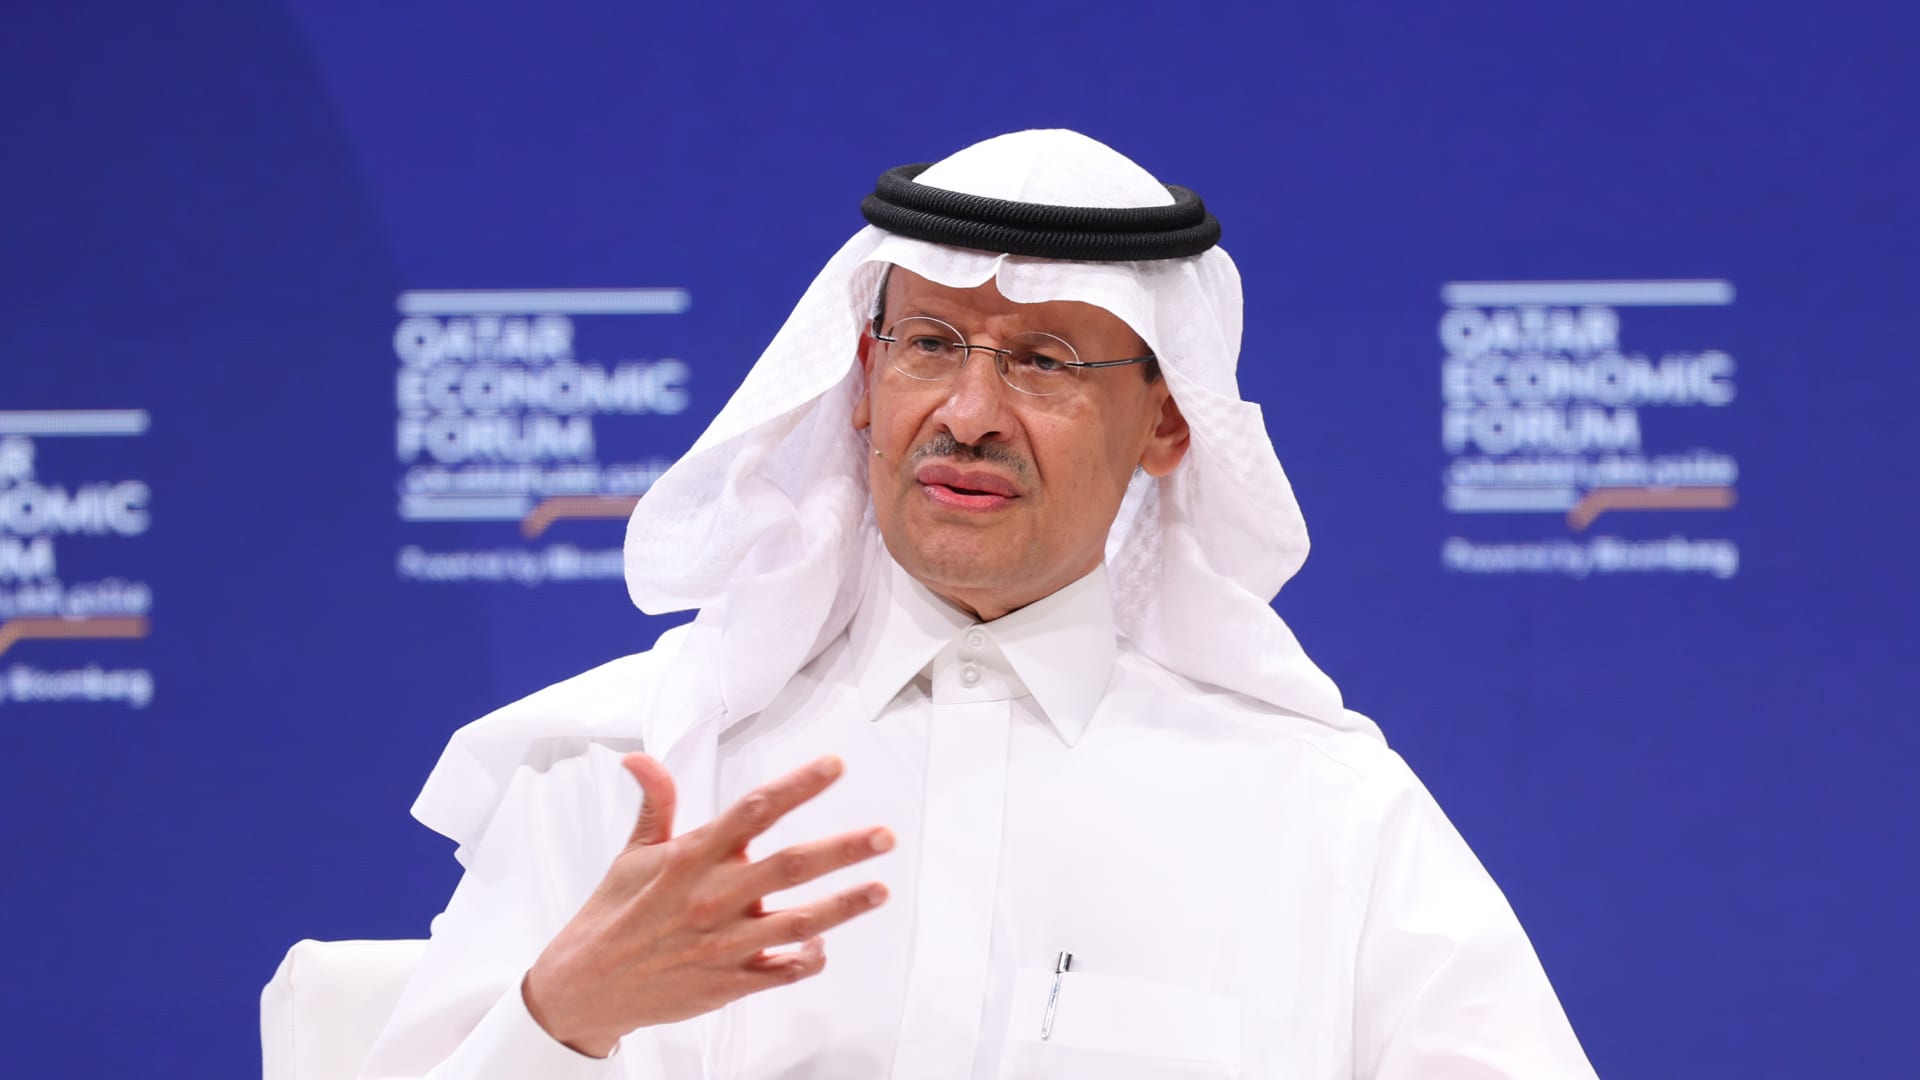 Saudi oil minister warns market speculators to ‘watch out’ ahead of OPEC+ meeting